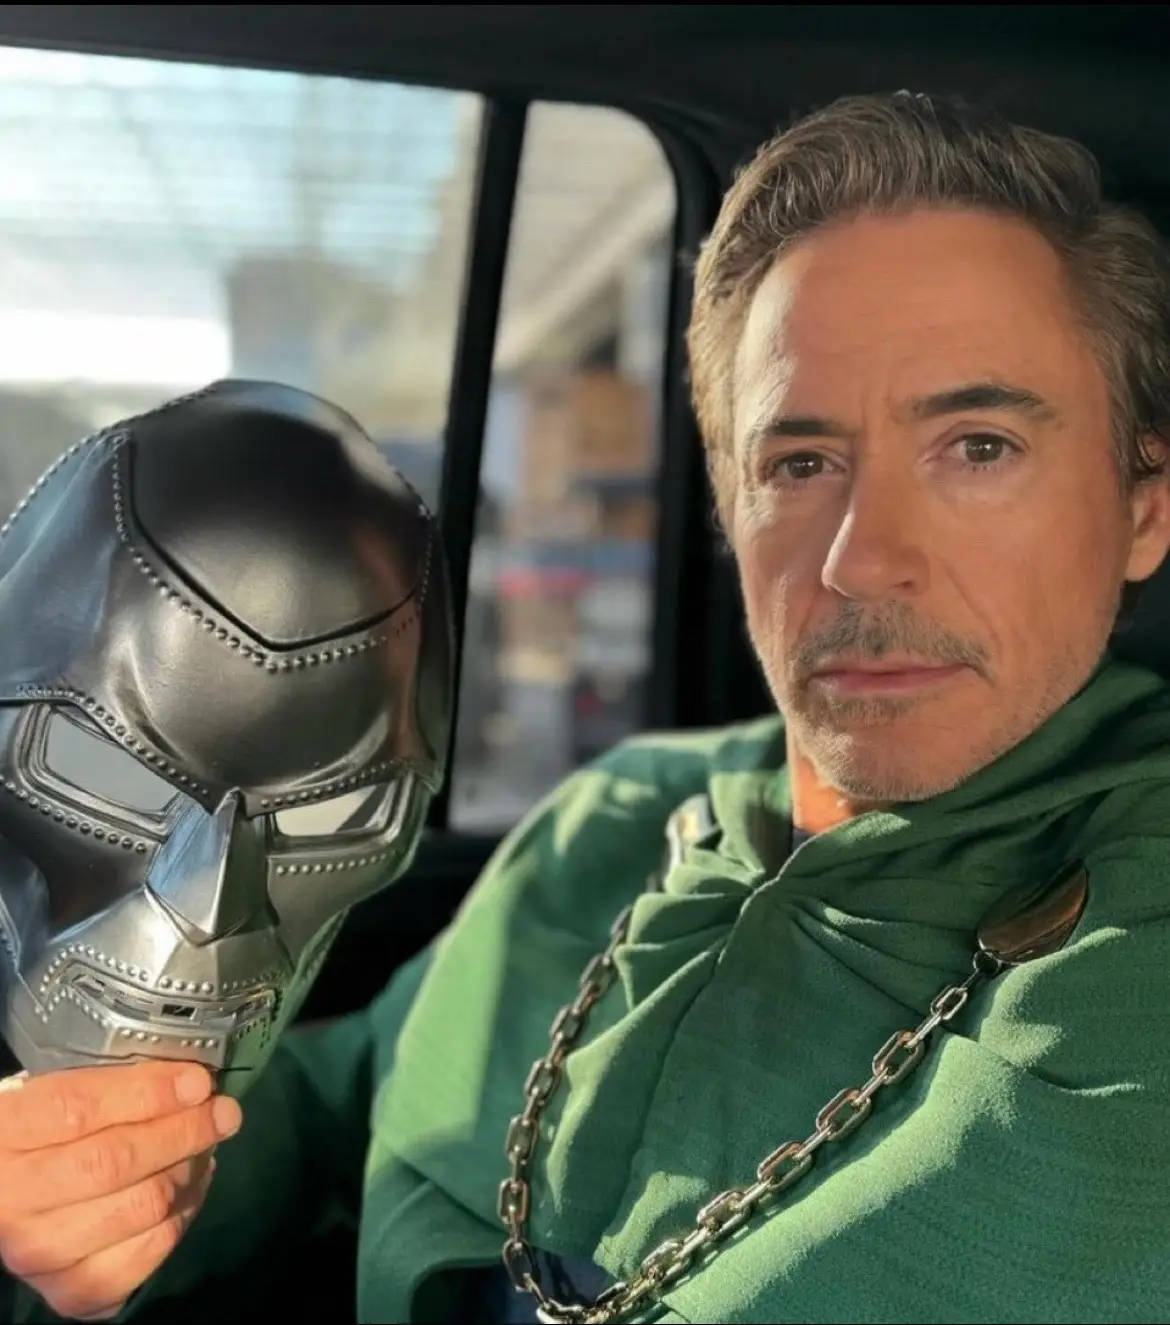 in 2005, Robert Downey Jr. was almost cast as Doctor Doom in the Fantastic Four film series. 19 years later, he was officially announced as the new Doctor Doom in the Marvel Cinematic Universe. in the 2021 book 